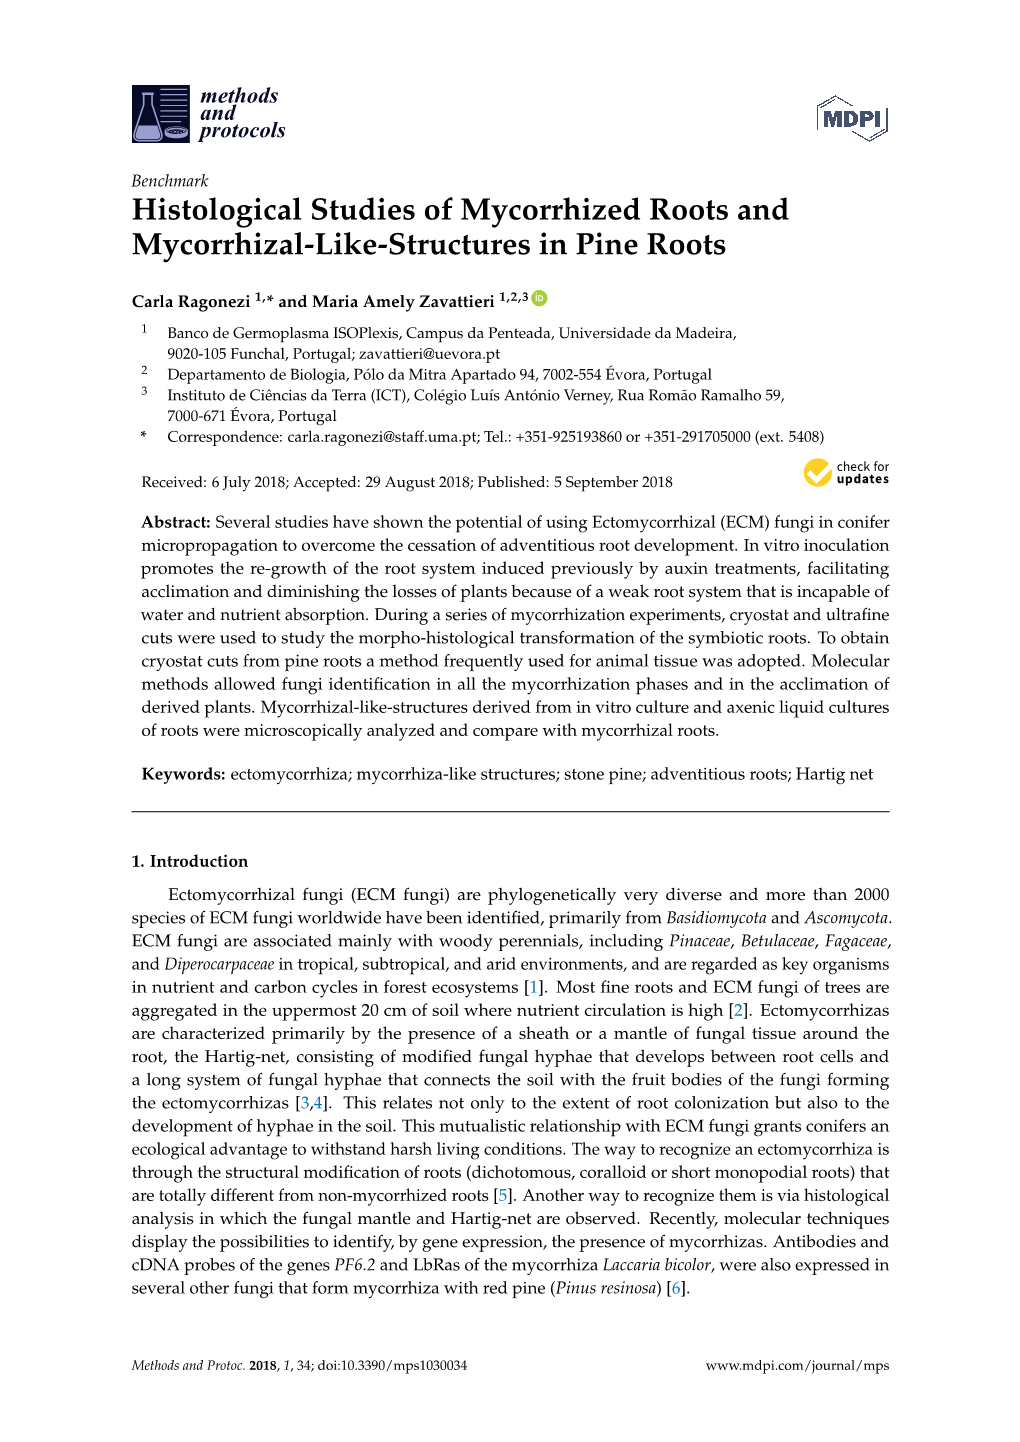 Histological Studies of Mycorrhized Roots and Mycorrhizal-Like-Structures in Pine Roots